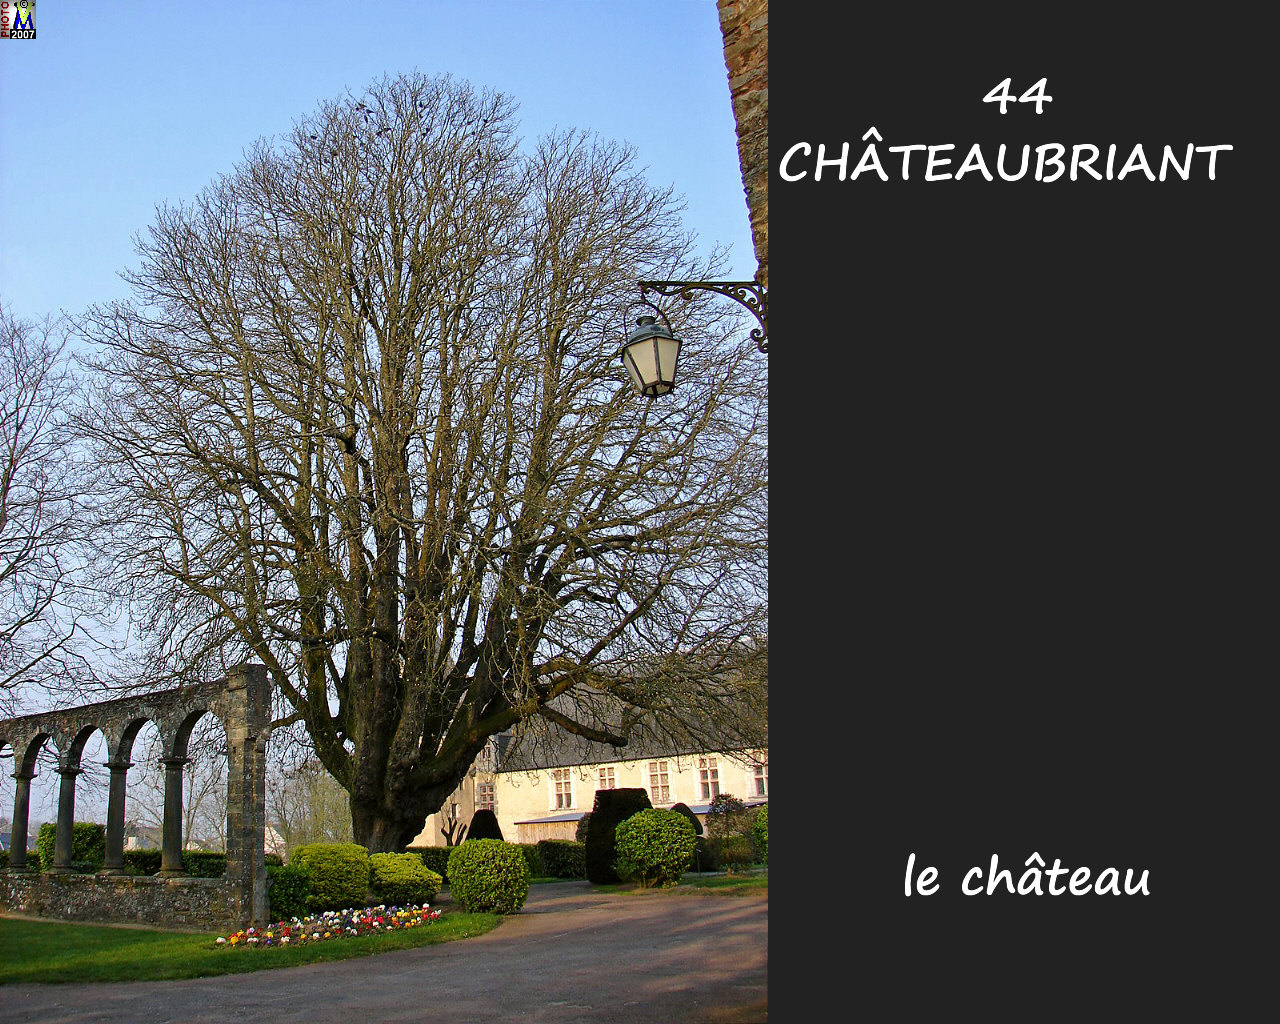 44CHATEAUBRIANT_chateau_244.jpg